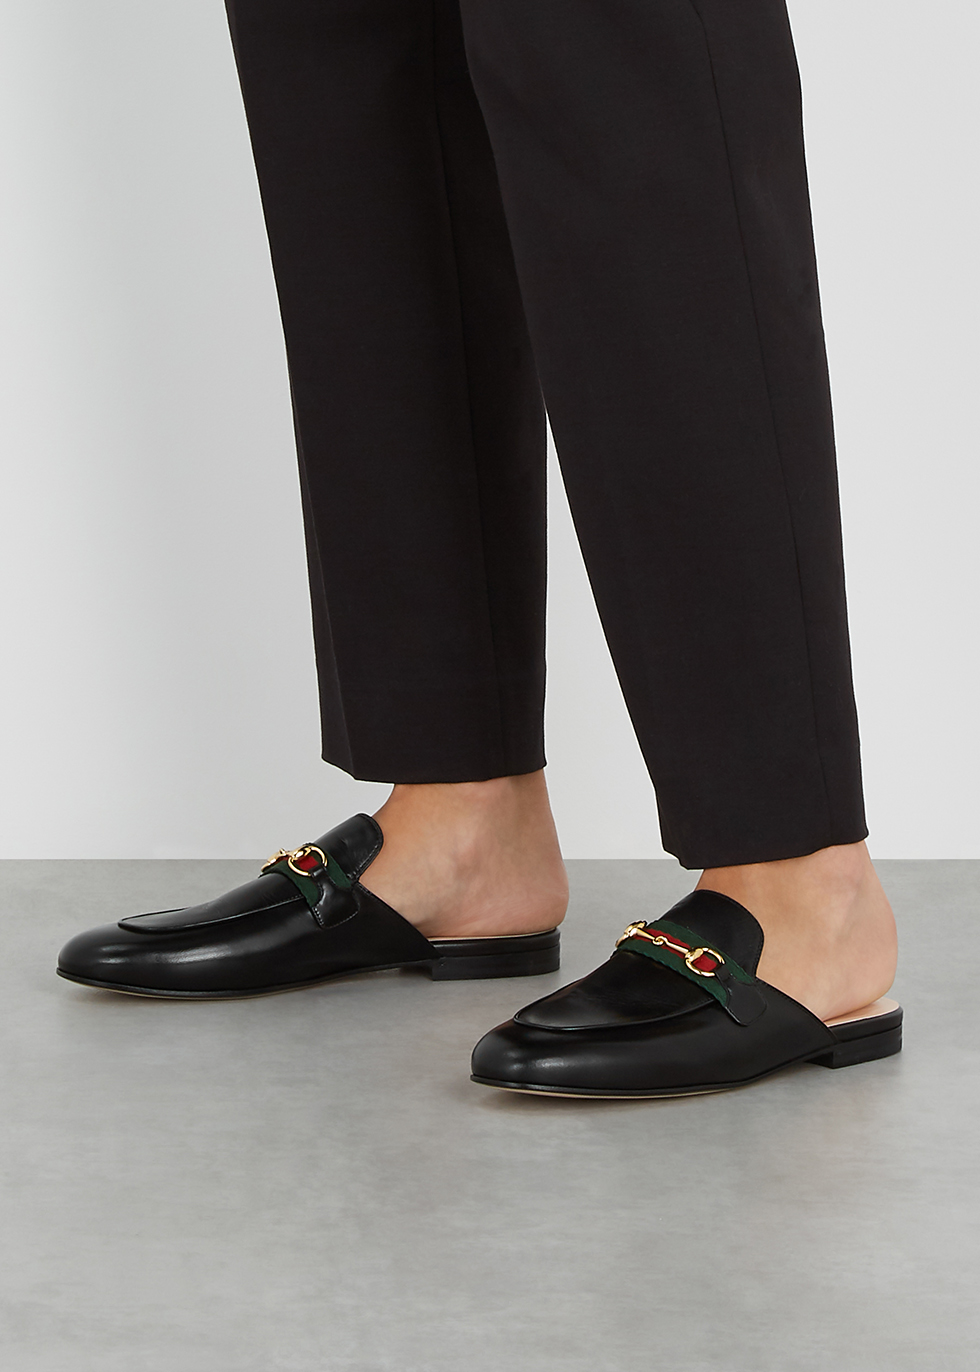 gucci backless loafers mens